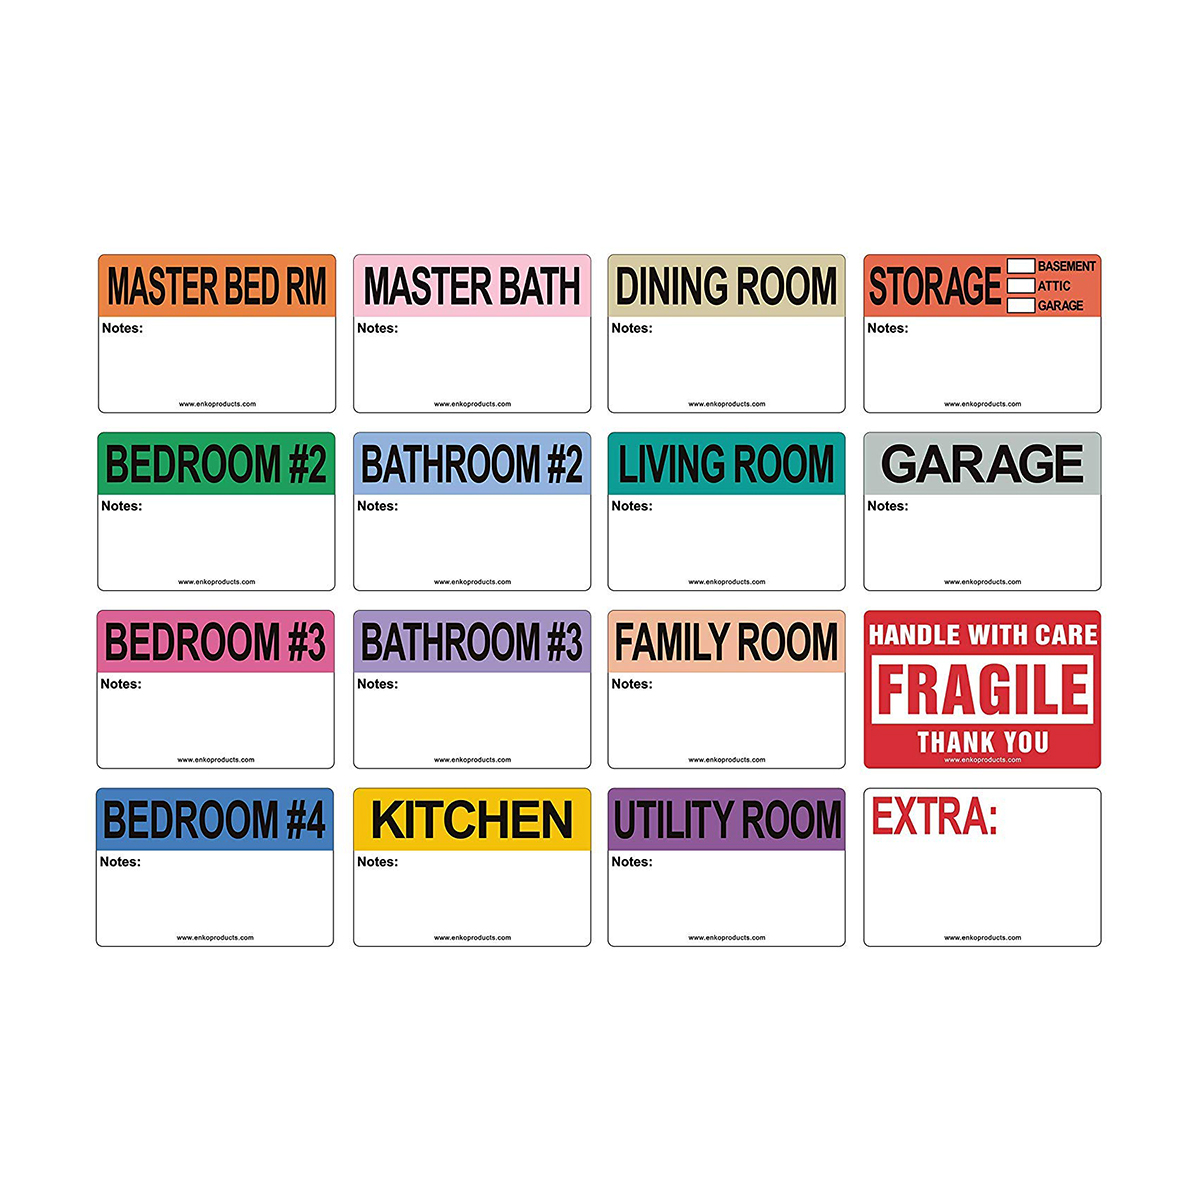 350 Home Moving Labels for 2 Bedroom House Apartment sticker Wardrobe Boxes 50 labels per room For Moving boxes Moving Supplies 7 Color Coded Label Rolls FRAGILE label included 